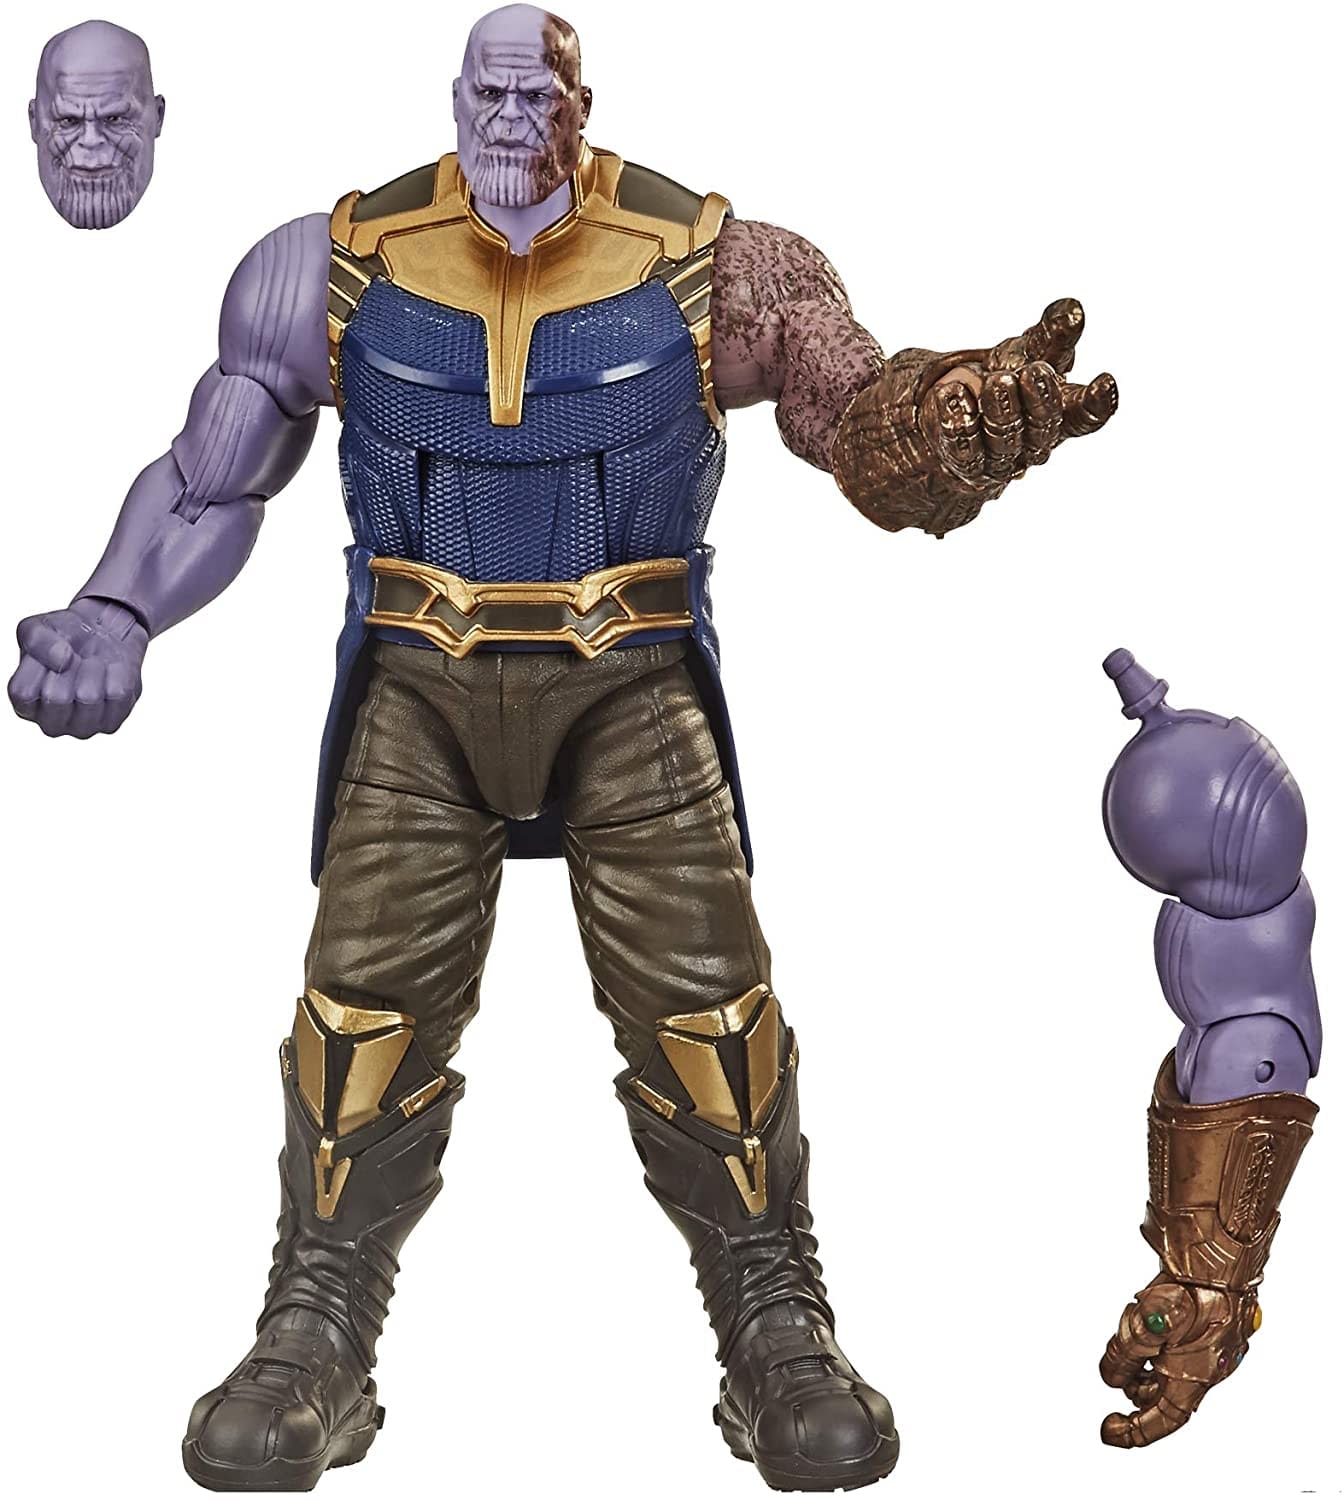 Marvel Legends MCU Children Of Thanos Amazon Exclusive Up For Order